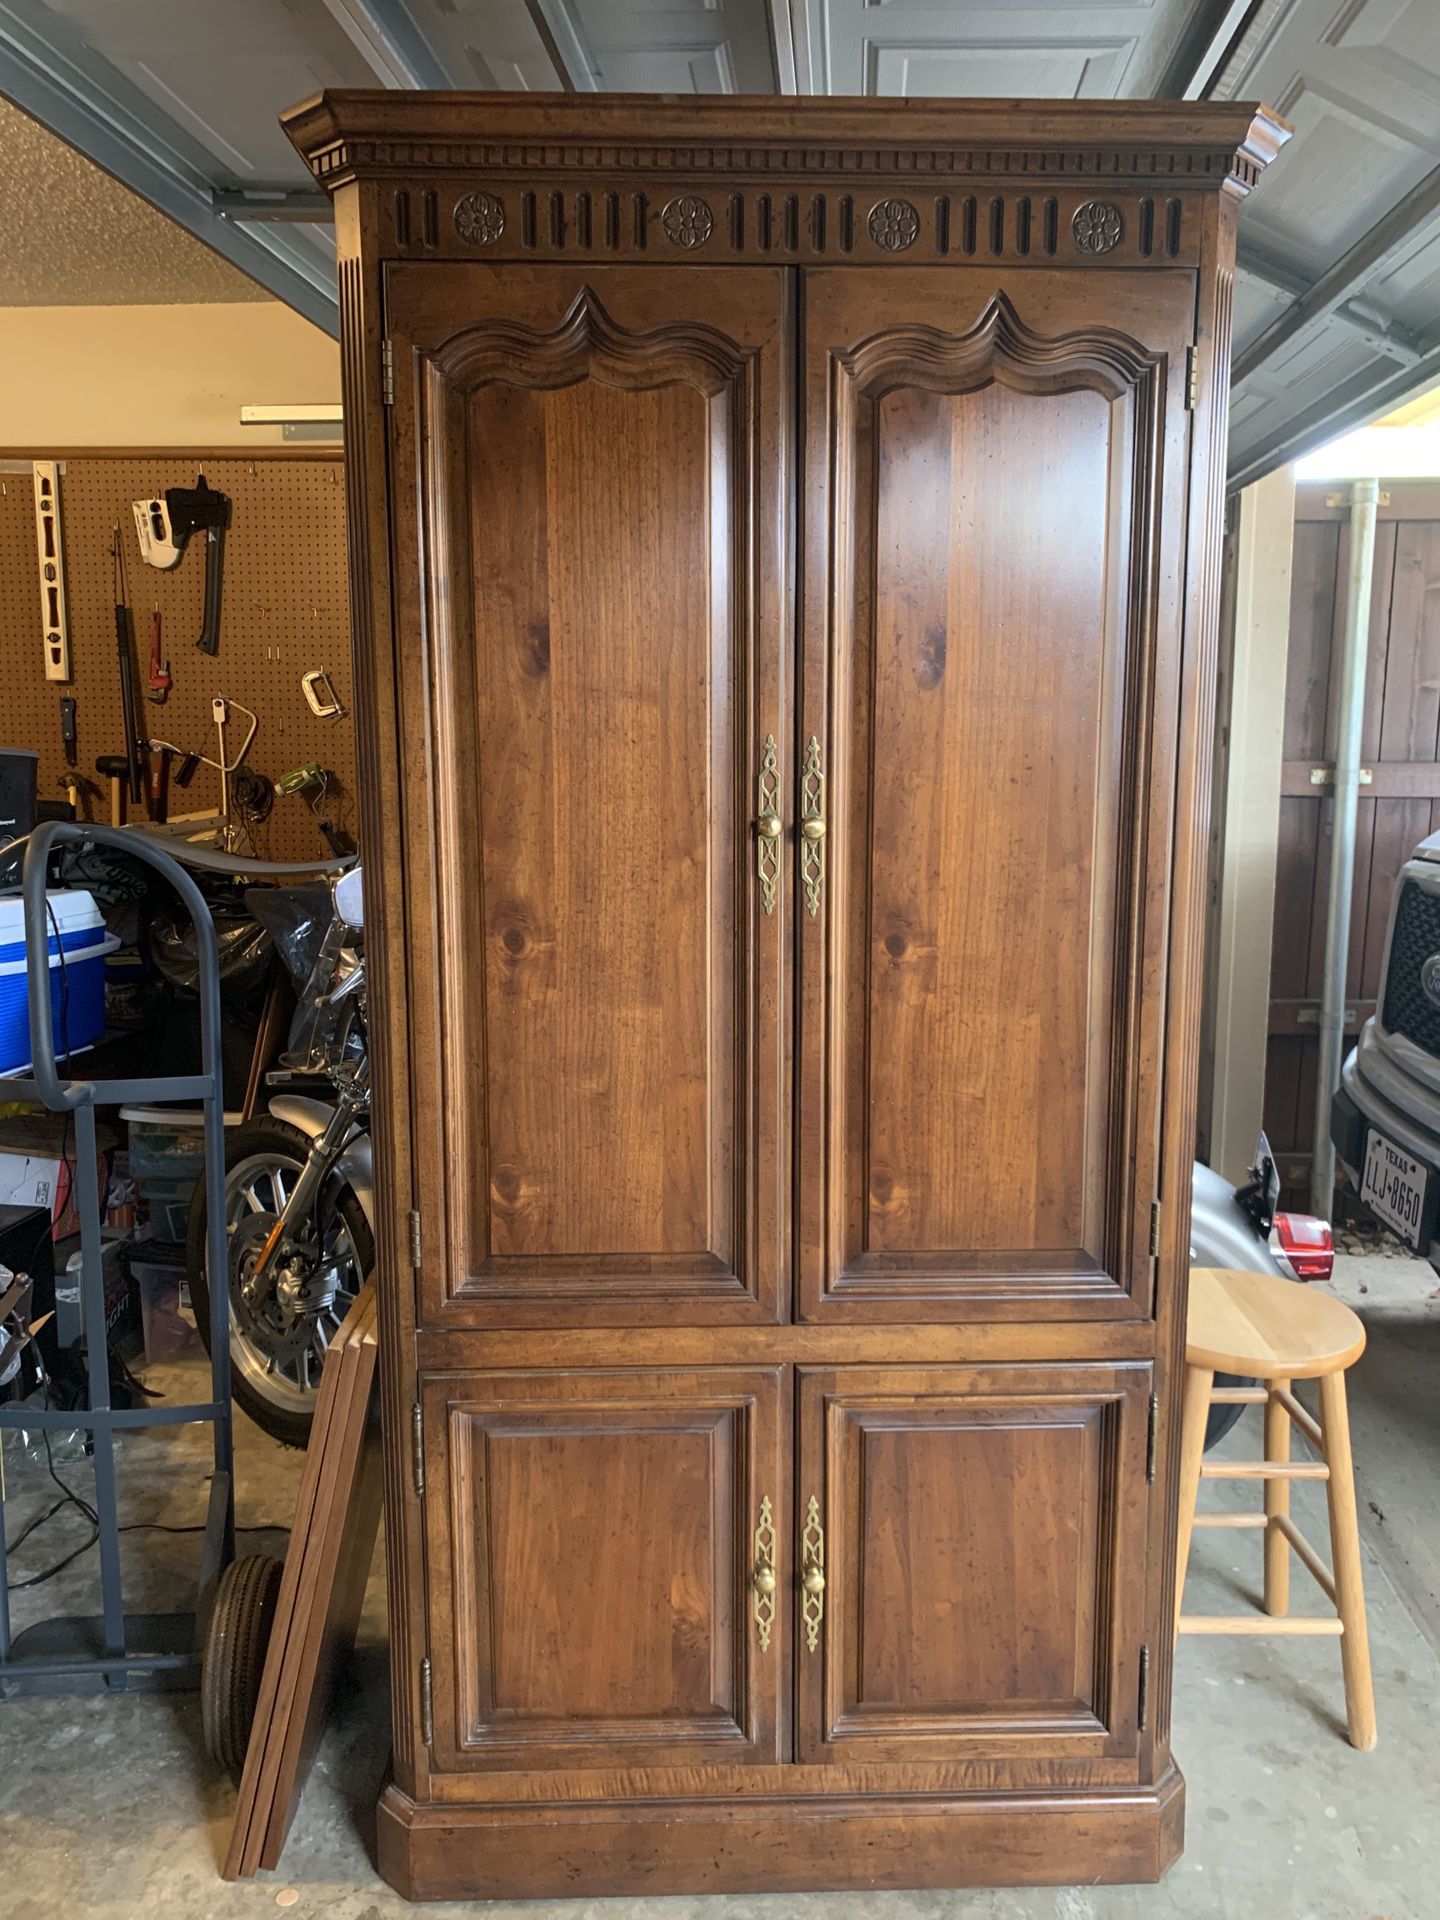 Weir’s Media Cabinet - Free! Must pick up